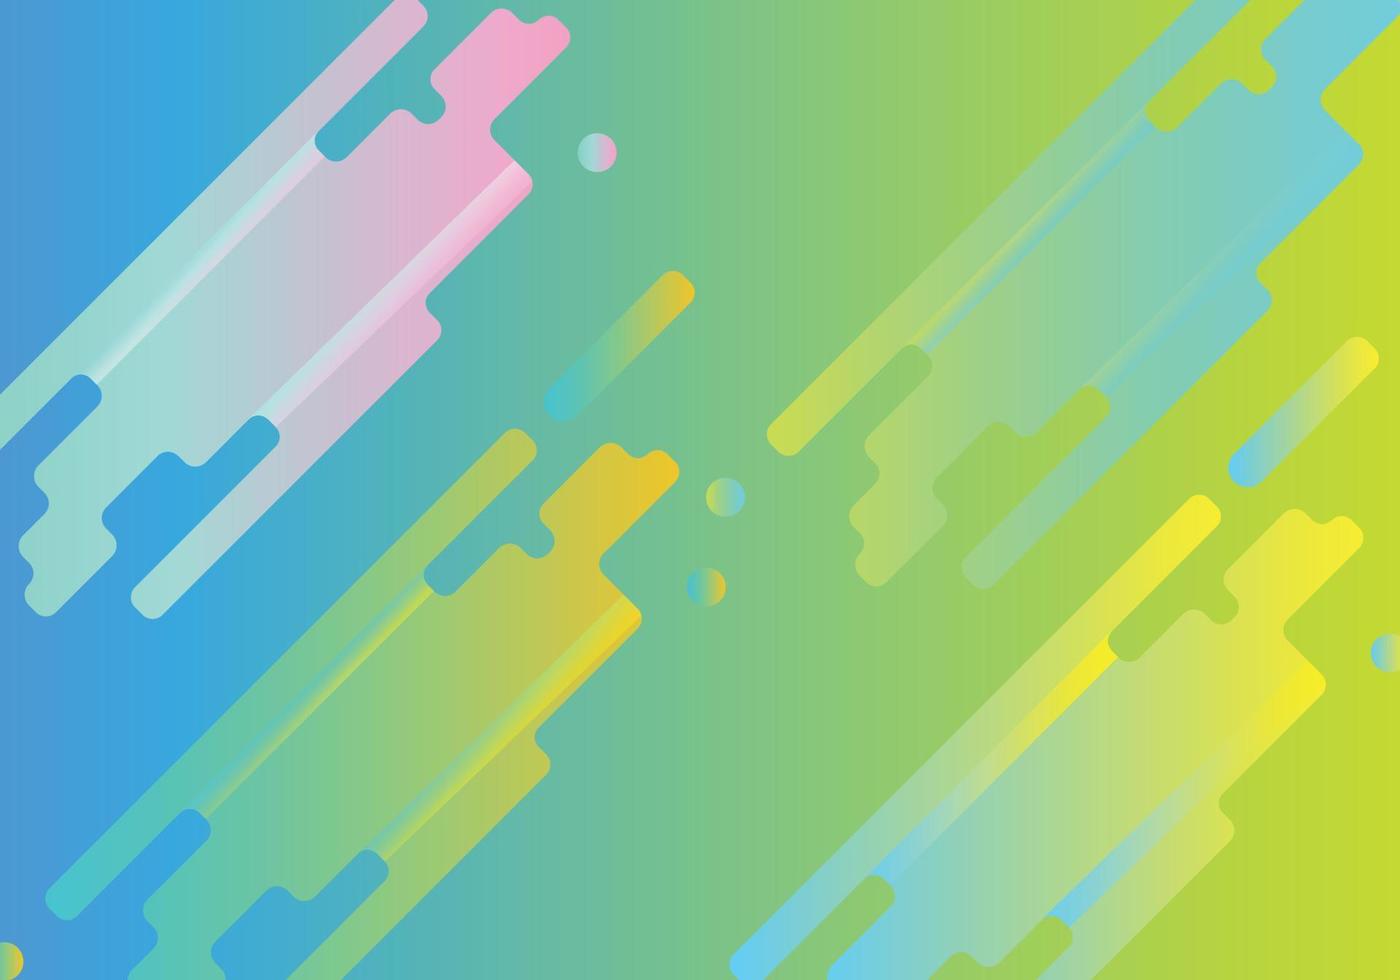 Abstract background composed of curved pieces in technological lines, gradients in pastel tones from yellow, green, light blue to dark vector